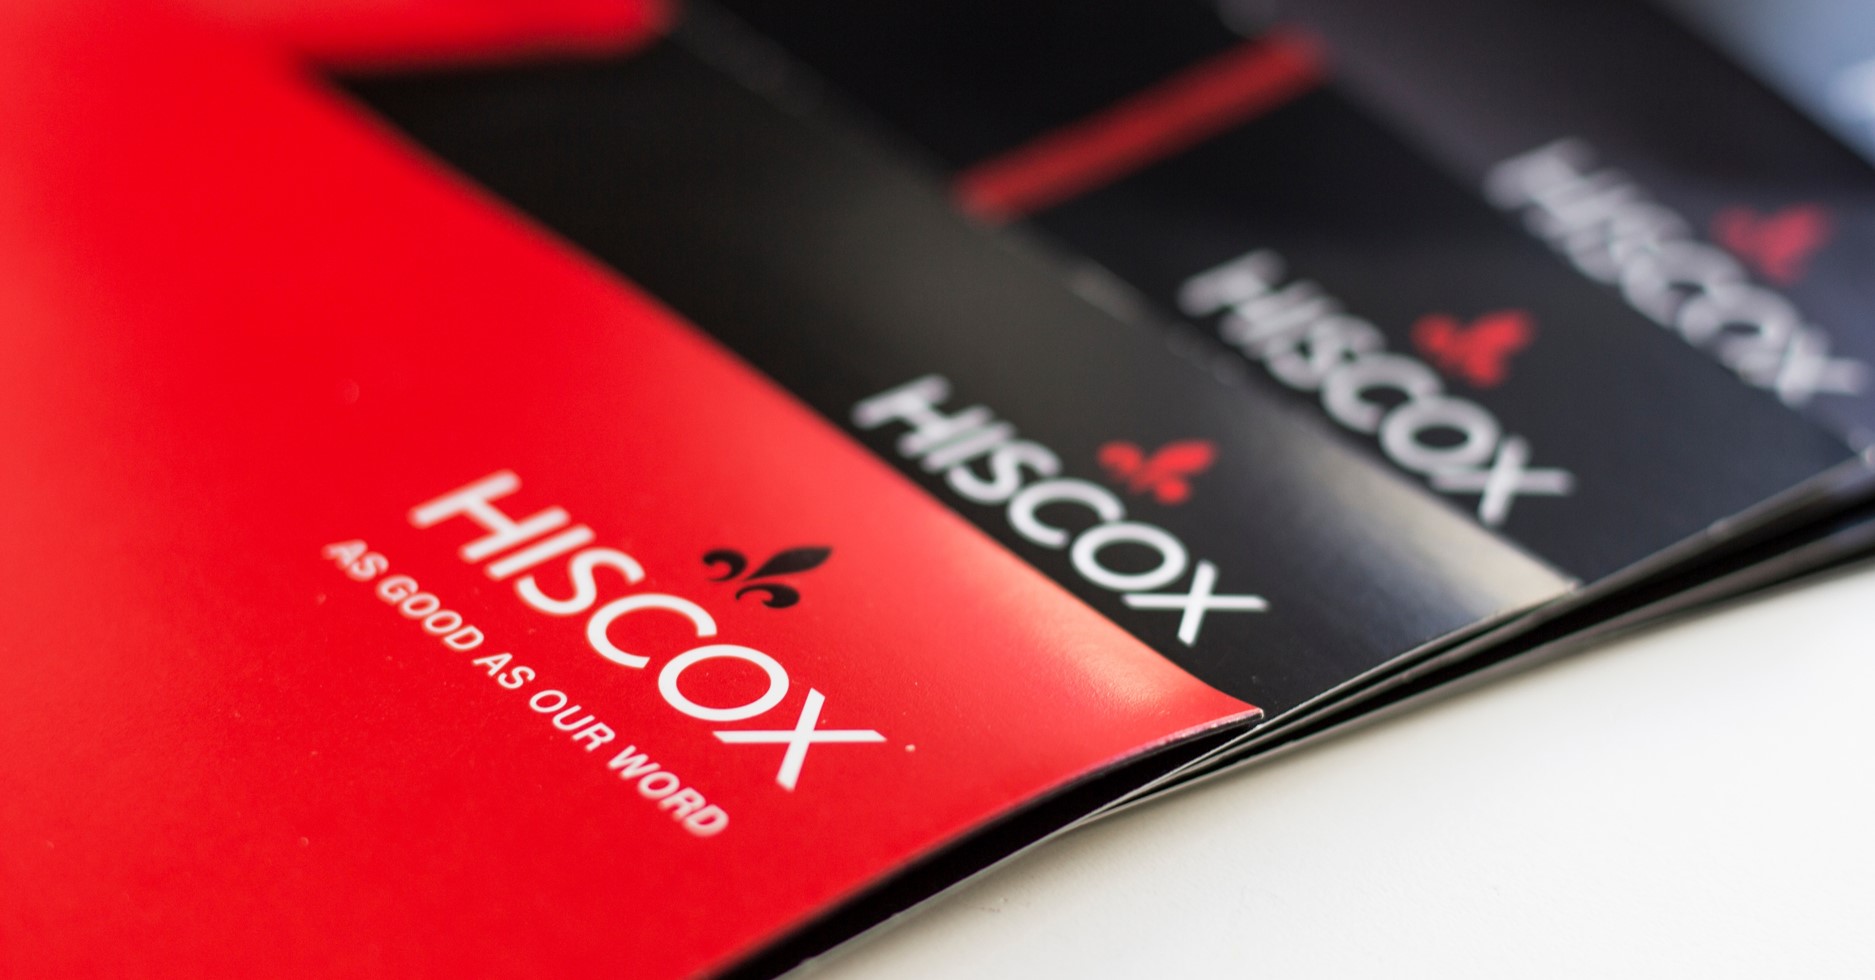 Hundreds of businesses take on Hiscox over insurance claims